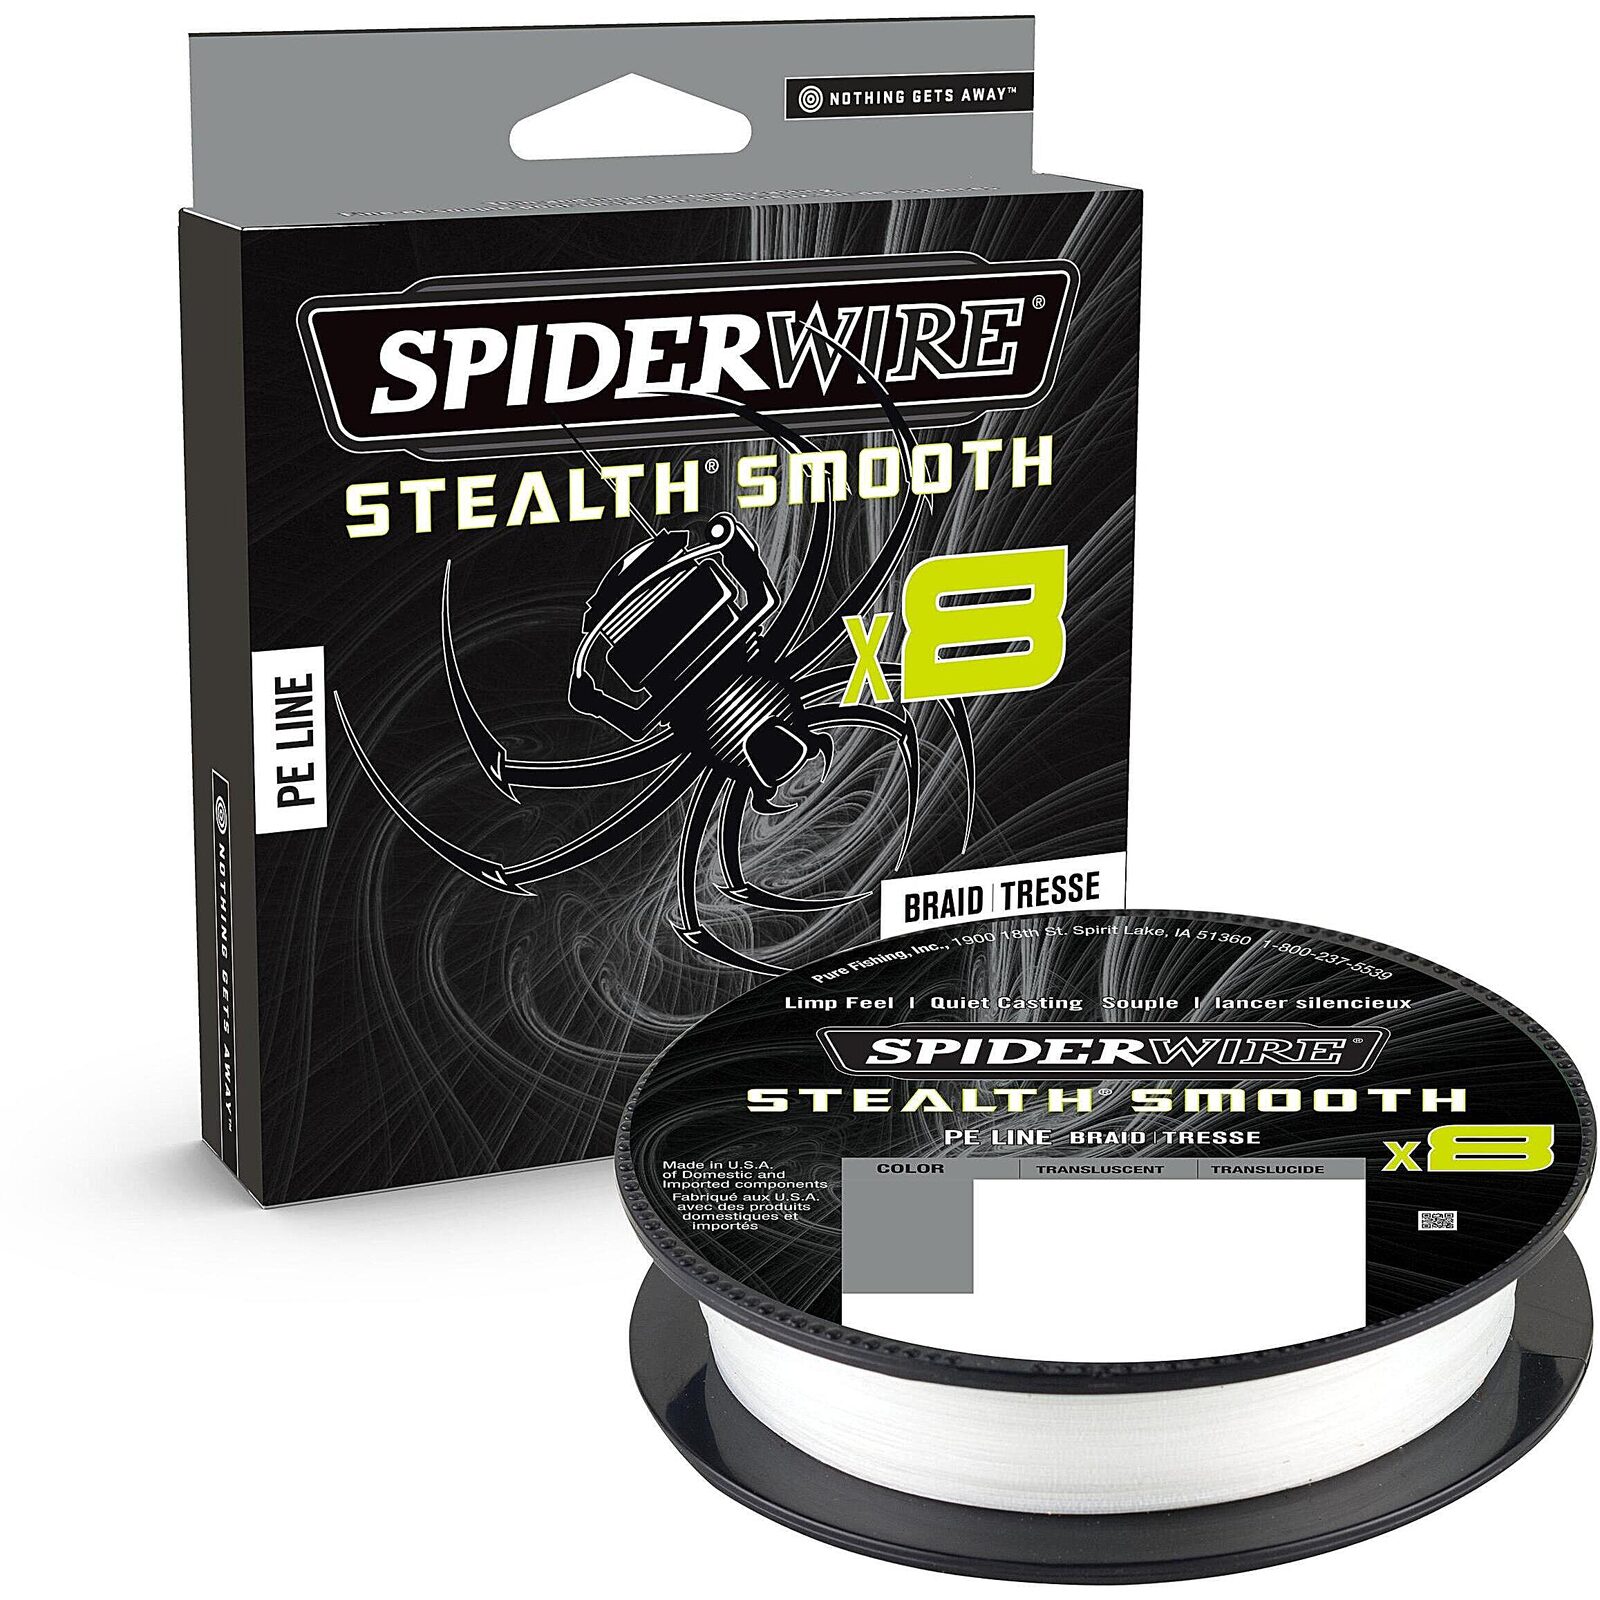 Spiderwire Stealth Smooth 8 Translucent kopen? Snelle levering!